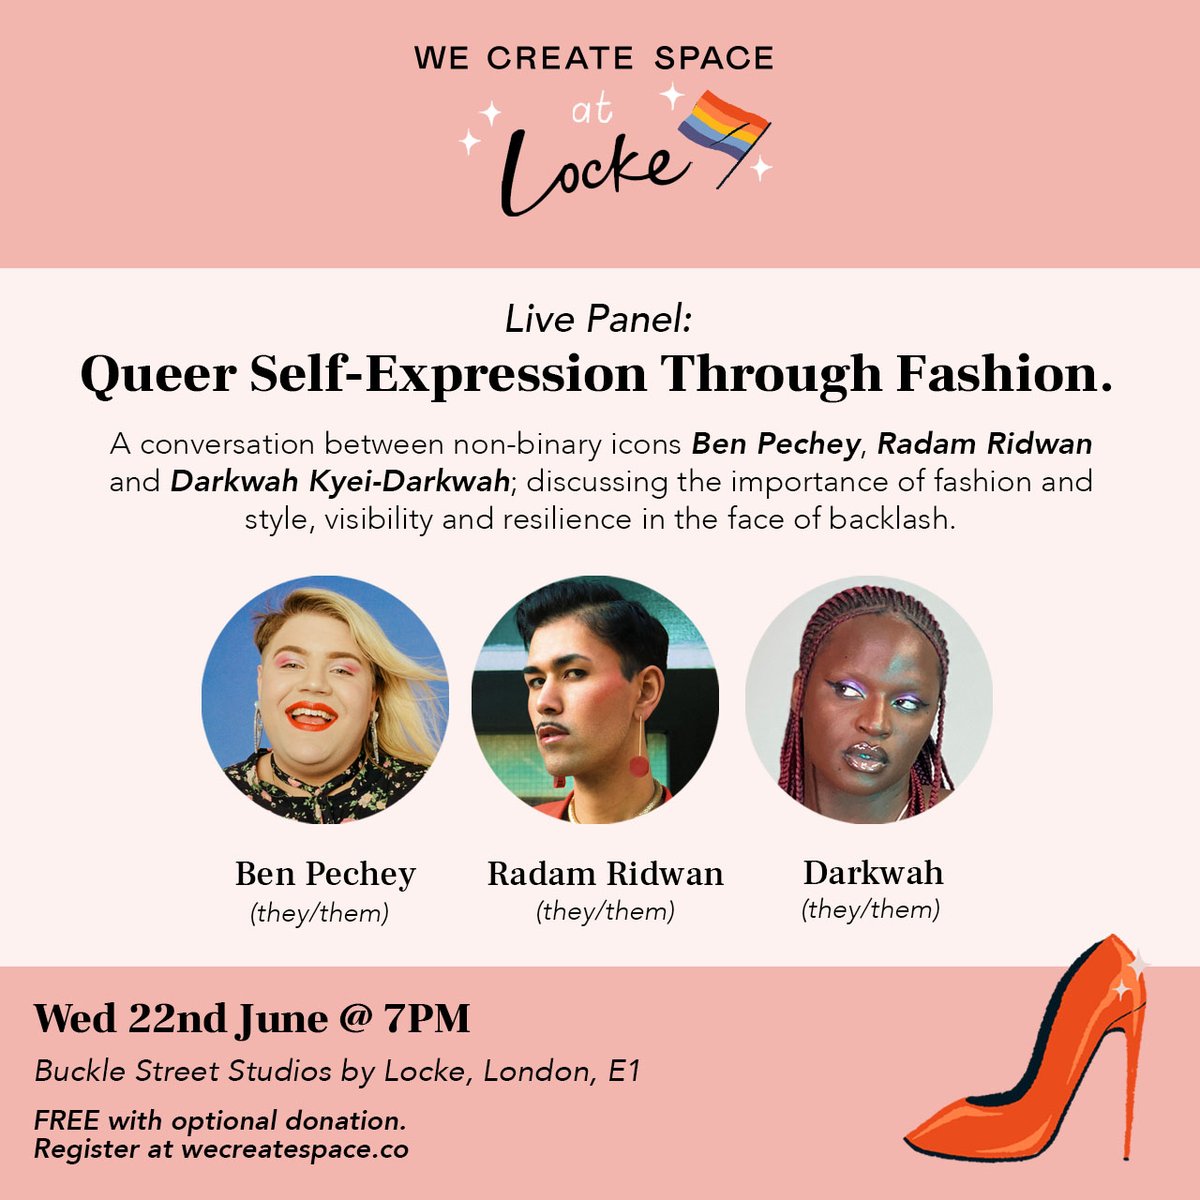 Have you signed up for our next Pride event at Locke yet? 🏳️‍🌈🏳️‍⚧️ Join us for a panel between non-binary icons: @hausofdarkwah, @radamridwan and @ben_pechey, exploring how personal style can help us create deeper understanding of our identities.